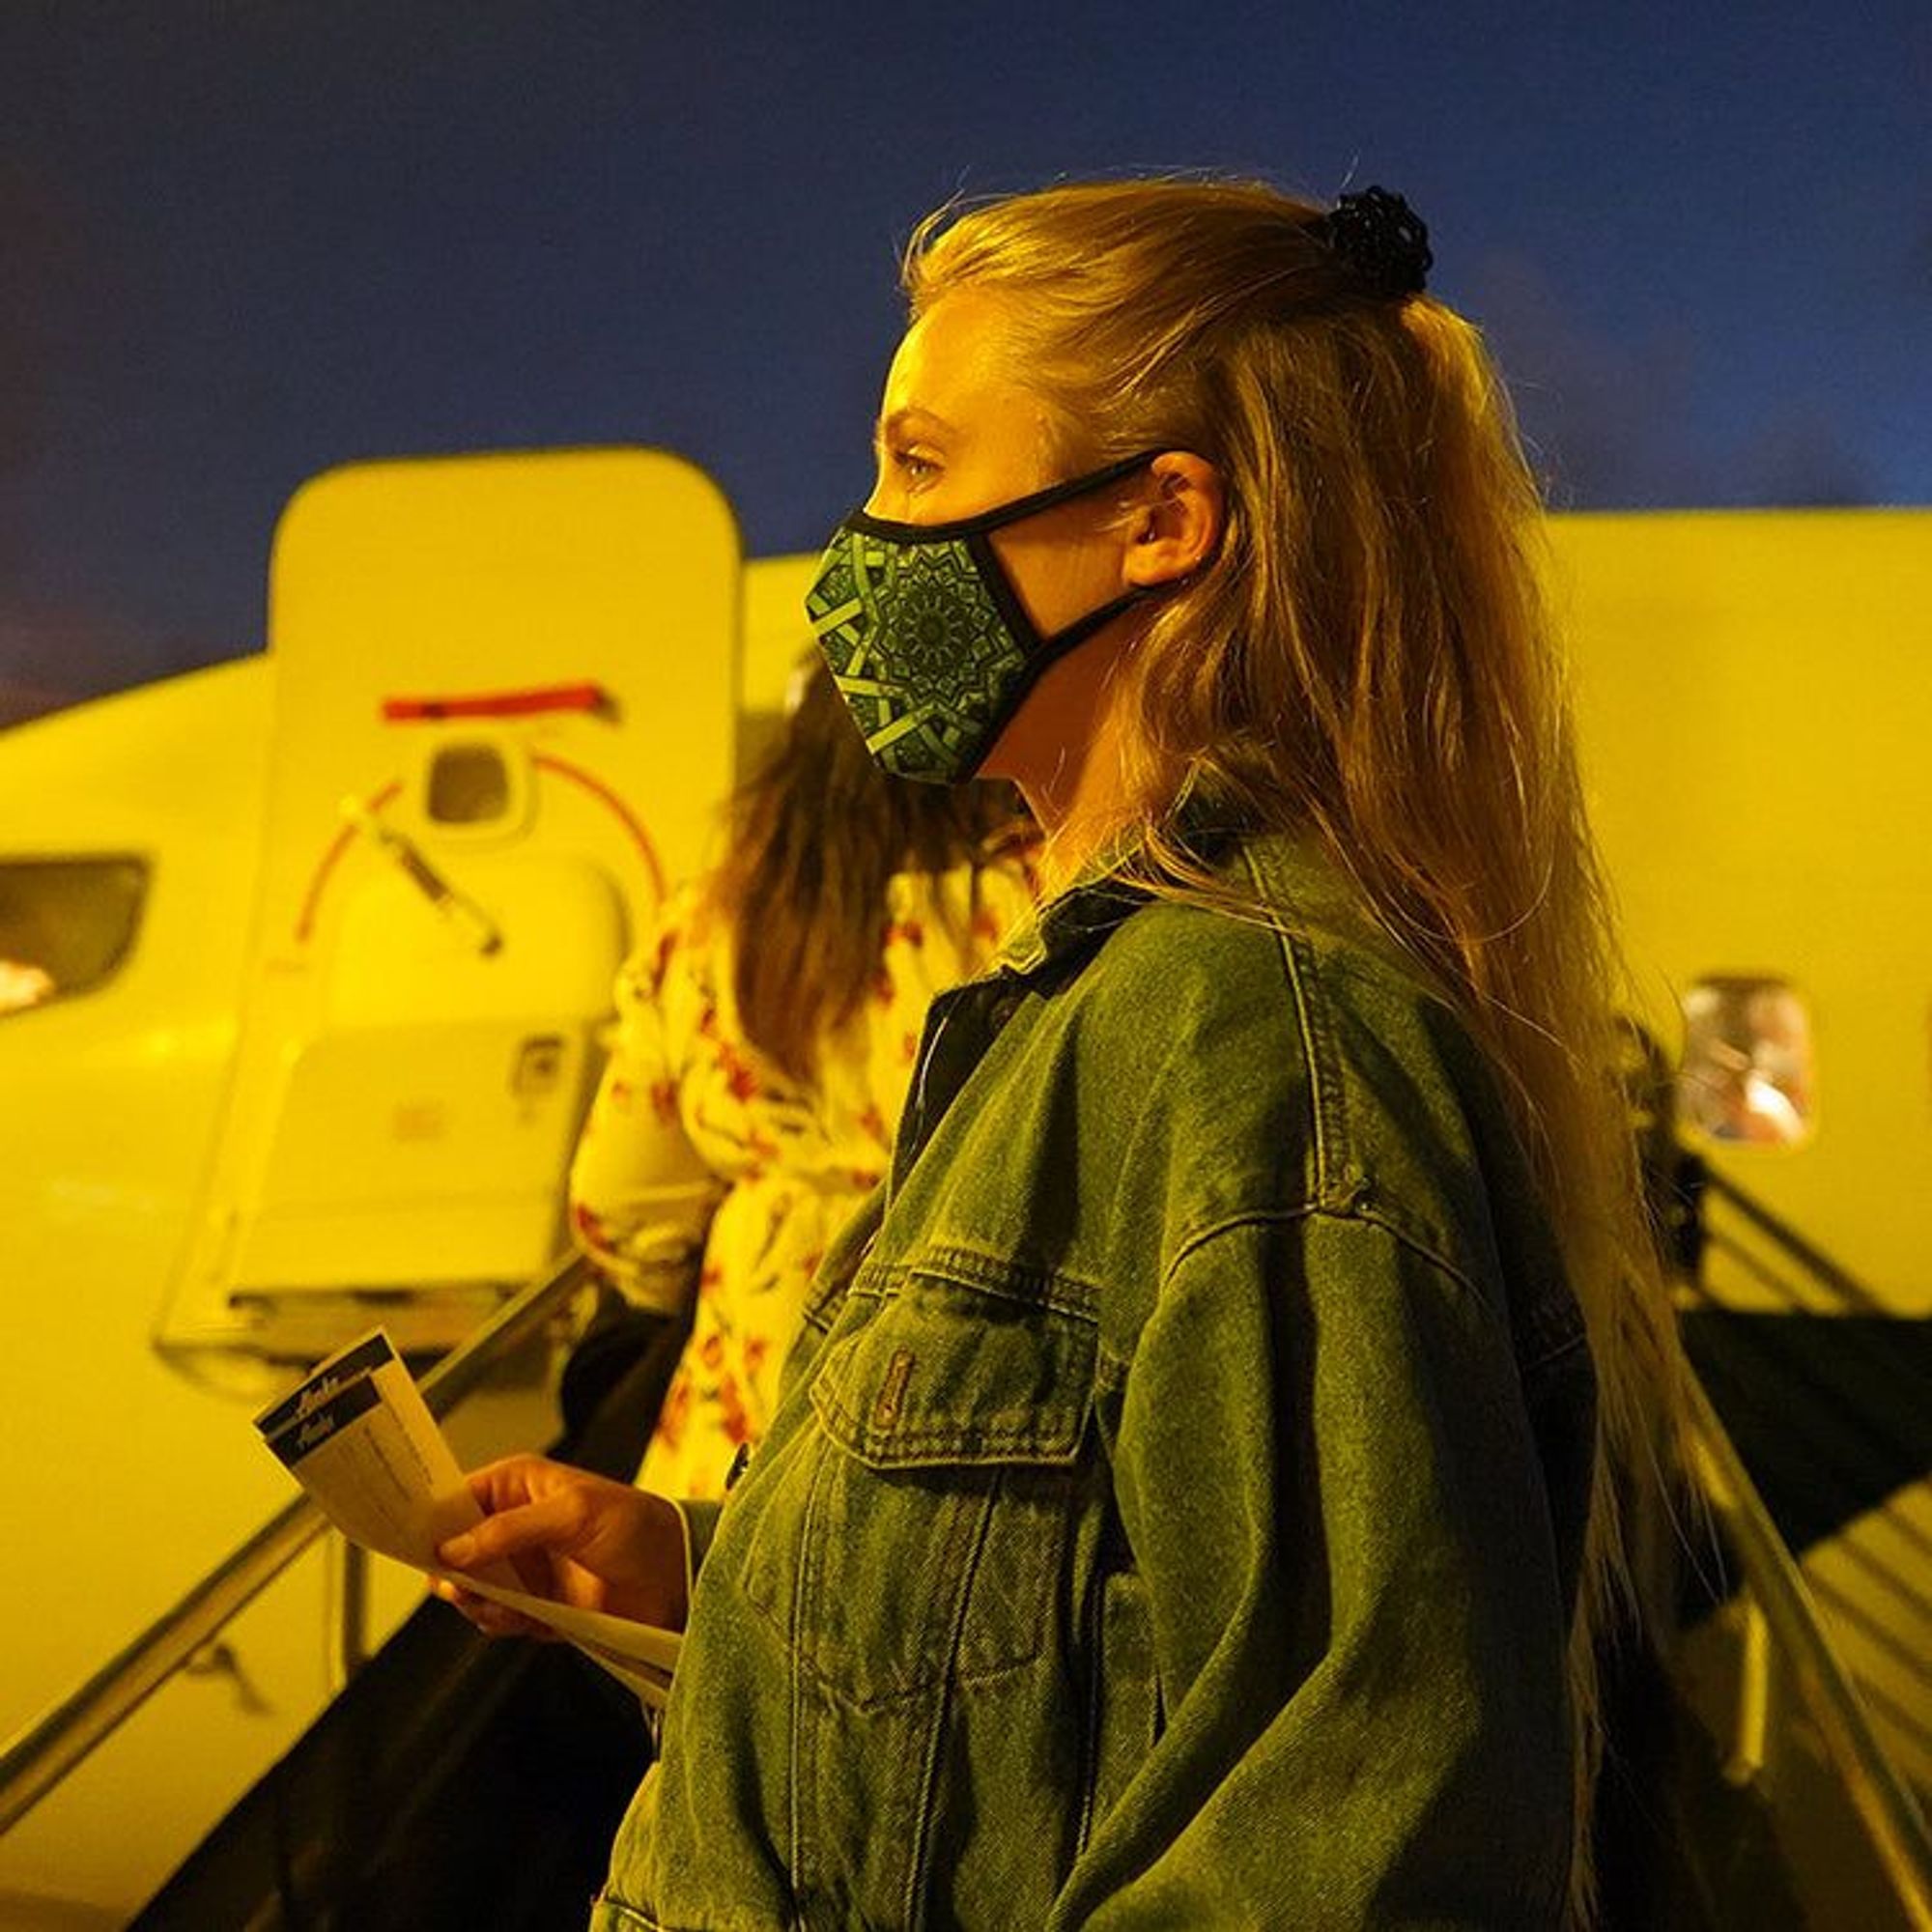 Masks on Planes: Air Travel background